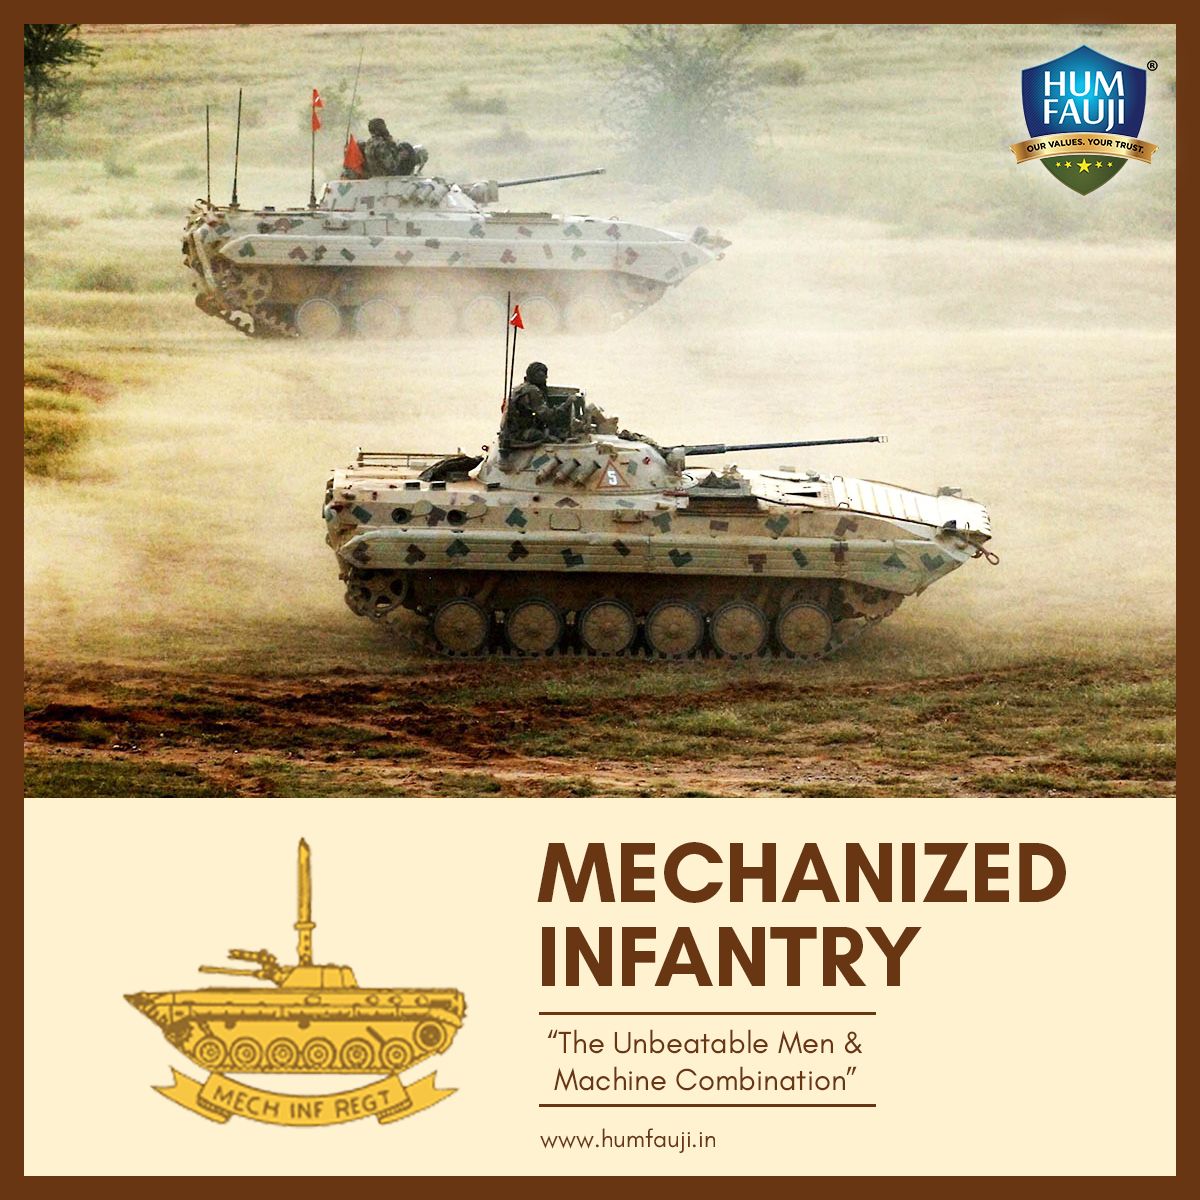 #TeamHumFauji wishes and celebrates the 42nd Raising Day of Mechanised Infantry. It is an infantry regiment of the Indian Army, comprising 27 battalions dispersed under various armoured formations throughout India

#MechanisedInfantry #IndianArmy #HumFaujiInitiatives